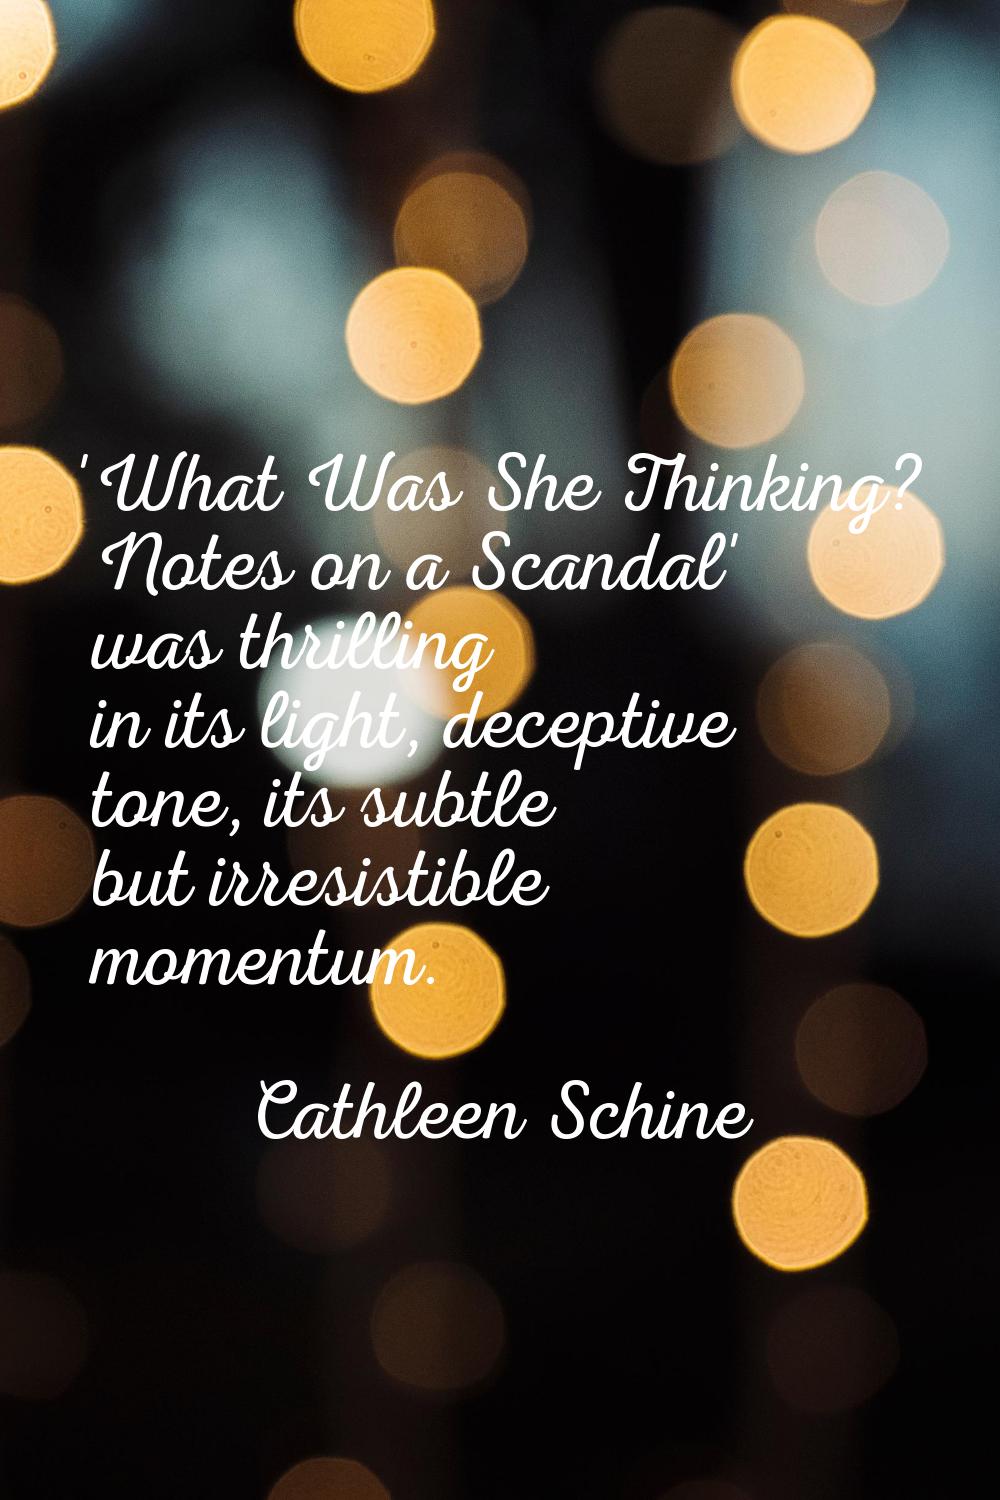 'What Was She Thinking? Notes on a Scandal' was thrilling in its light, deceptive tone, its subtle 